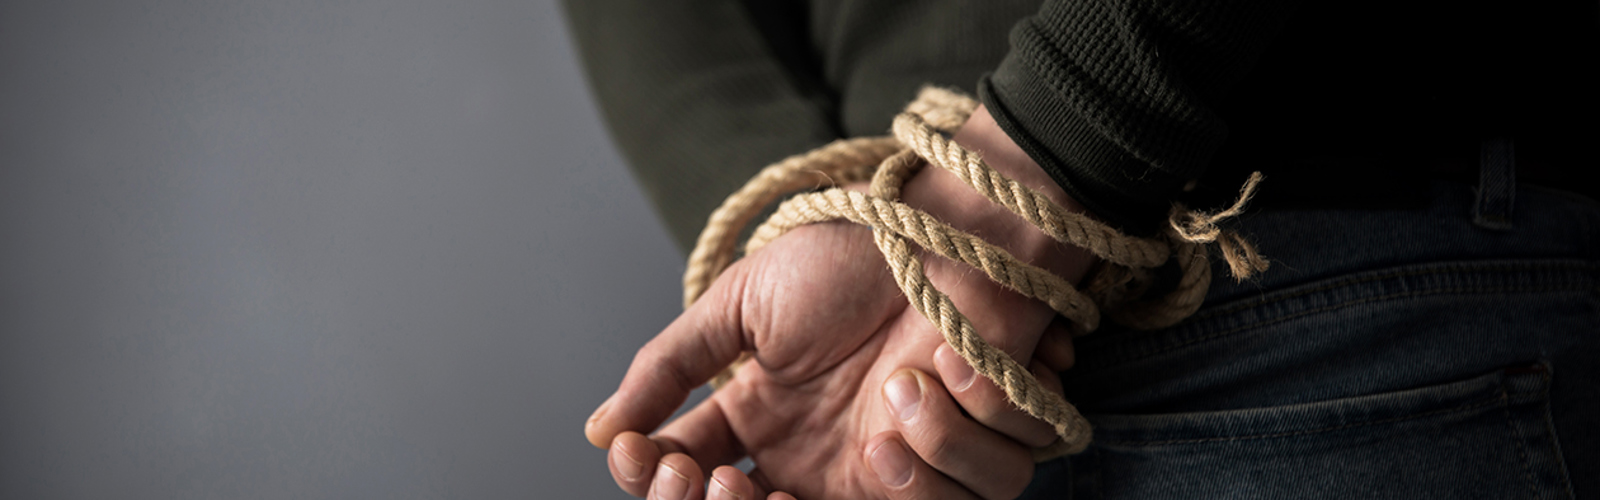 Hands tied with rope